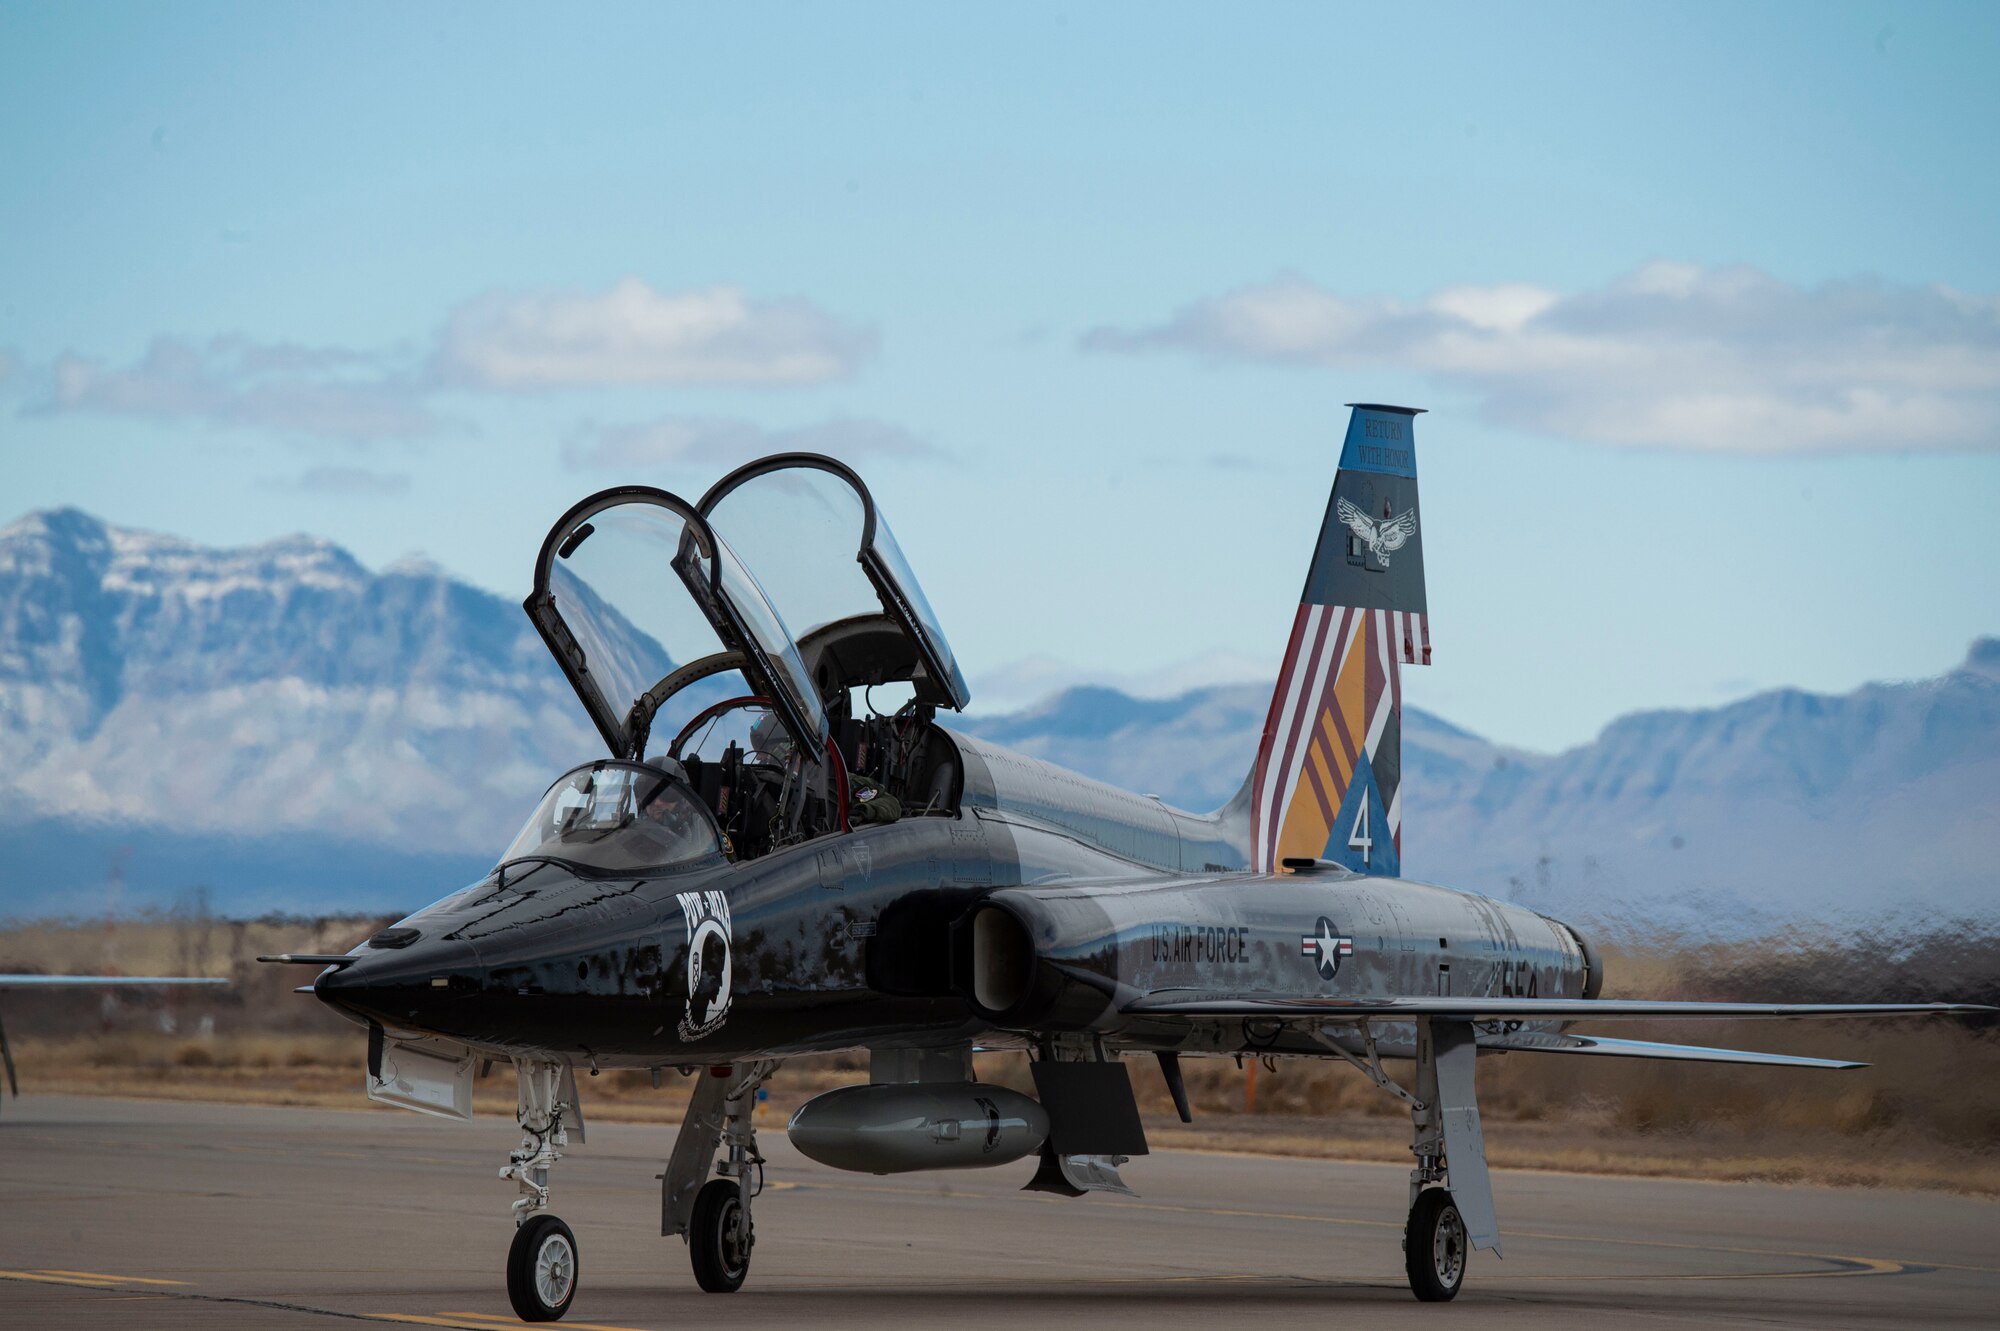 U.S. Air Force Maj. Gen. Phillip Stewart, 19th Air Force commander, taxis a T-38 Talon assigned to the 12th Flying Training Wing at Randolph Air Force Base, Texas, during 19th Air Force Commander’s Call and Fly-In at Holloman Air Force Base, New Mexico, March 3, 2023.